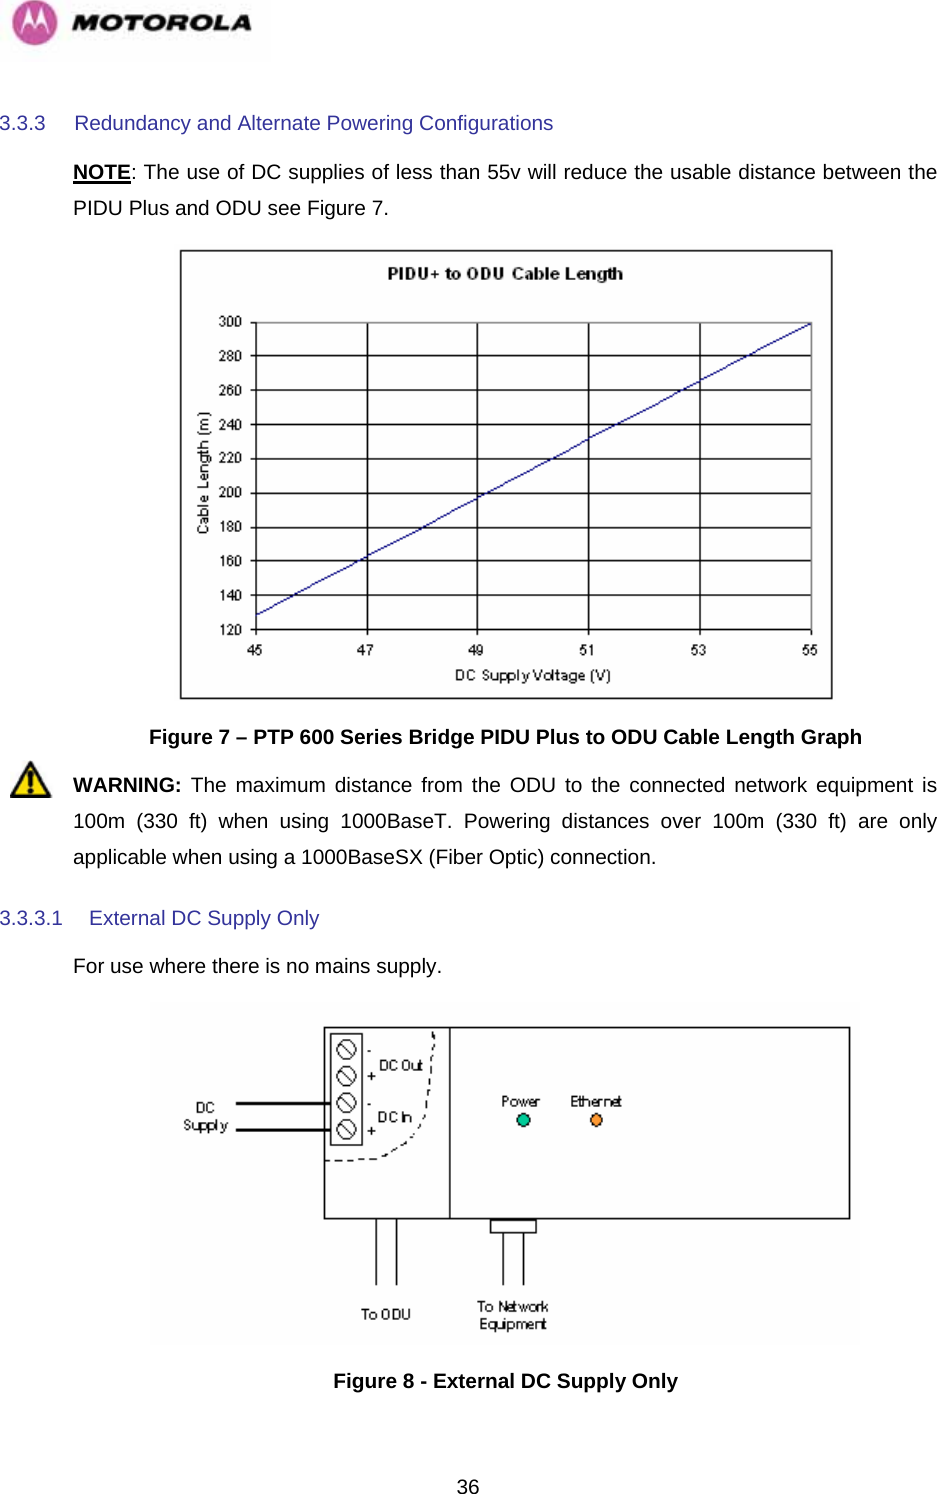   363.3.3  Redundancy and Alternate Powering Configurations NOTE: The use of DC supplies of less than 55v will reduce the usable distance between the PIDU Plus and ODU see Figure 7.  Figure 7 – PTP 600 Series Bridge PIDU Plus to ODU Cable Length Graph WARNING: The maximum distance from the ODU to the connected network equipment is 100m (330 ft) when using 1000BaseT. Powering distances over 100m (330 ft) are only applicable when using a 1000BaseSX (Fiber Optic) connection. 3.3.3.1  External DC Supply Only For use where there is no mains supply.  Figure 8 - External DC Supply Only 